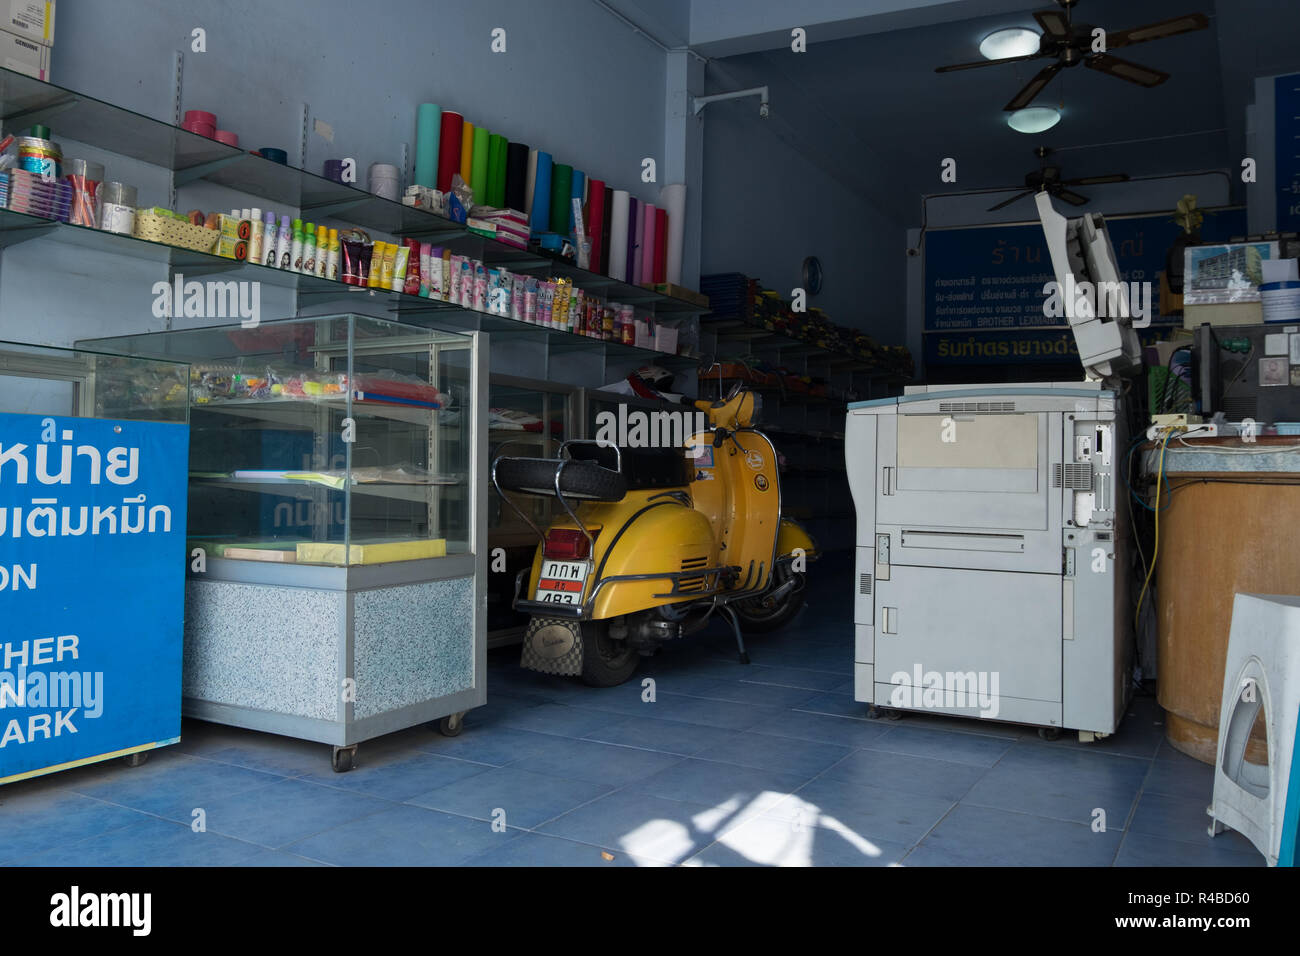 A yellow Vespa scooter is casually parked inside an office supply store in Hat Yai, Thailand. Stock Photo